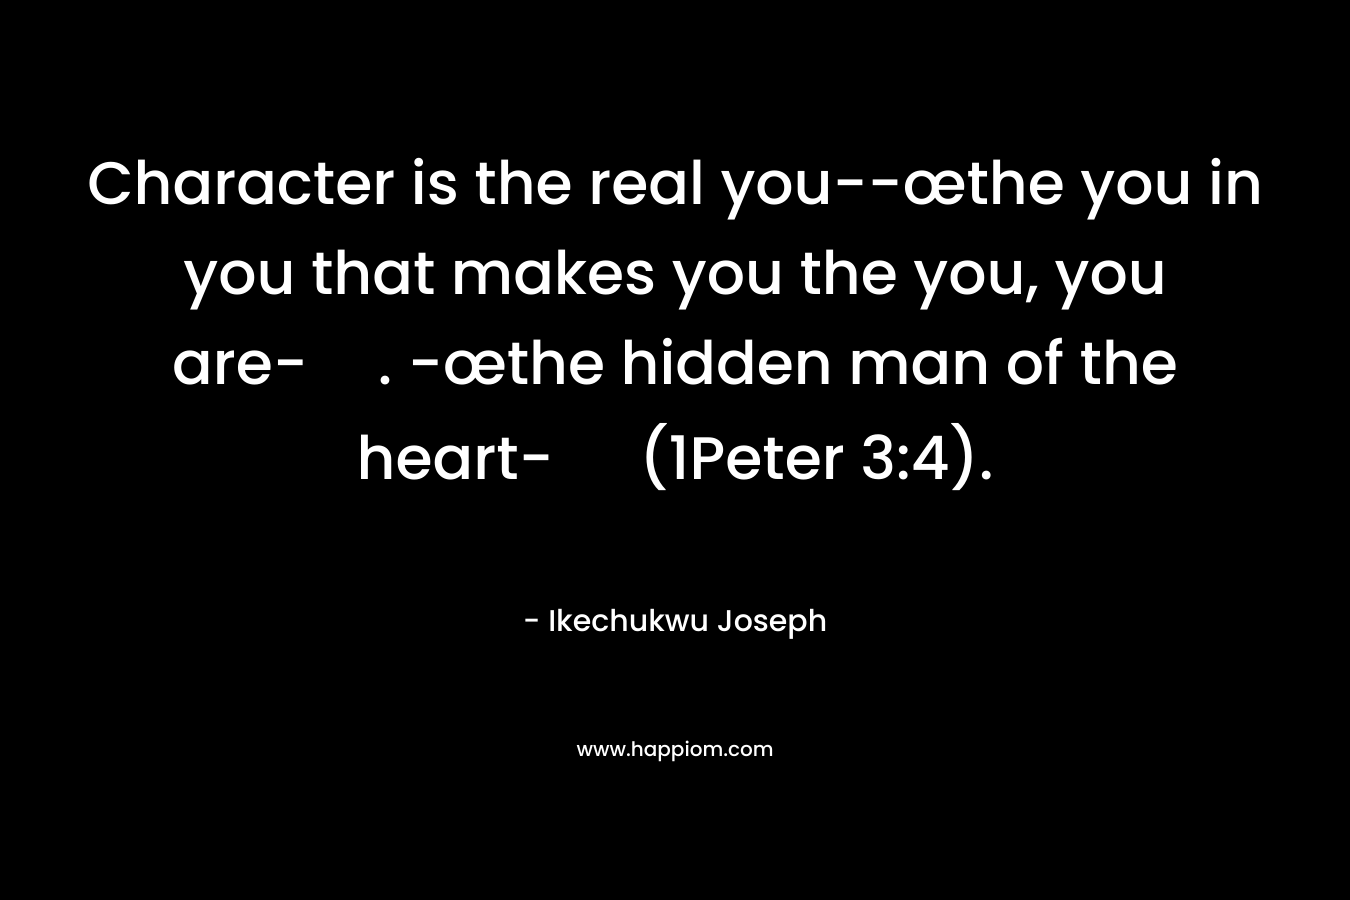 Character is the real you--œthe you in you that makes you the you, you are-. -œthe hidden man of the heart- (1Peter 3:4).